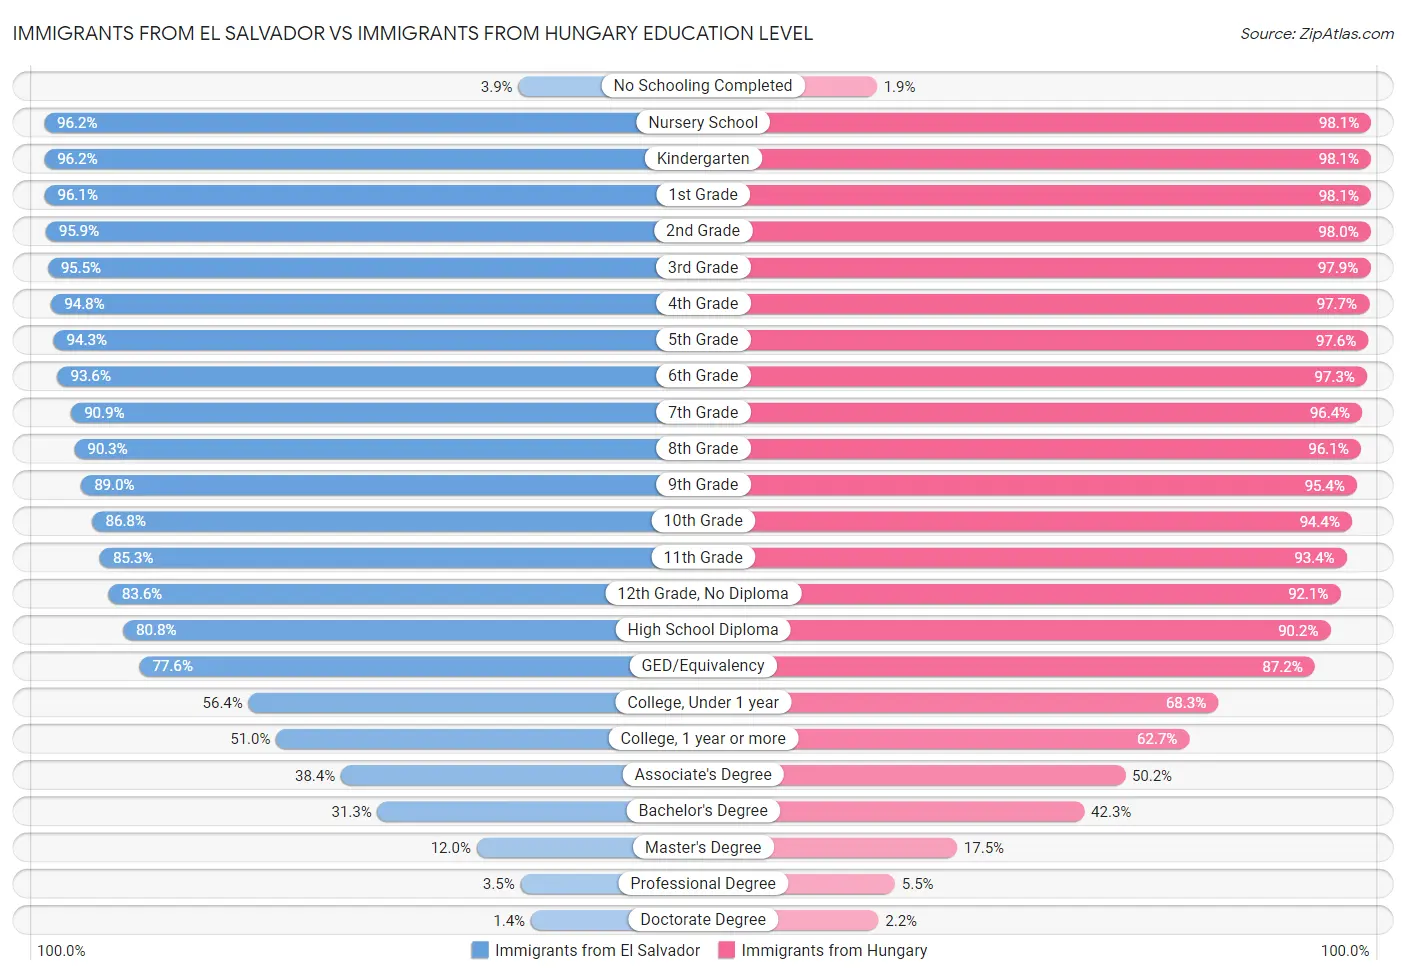 Immigrants from El Salvador vs Immigrants from Hungary Education Level